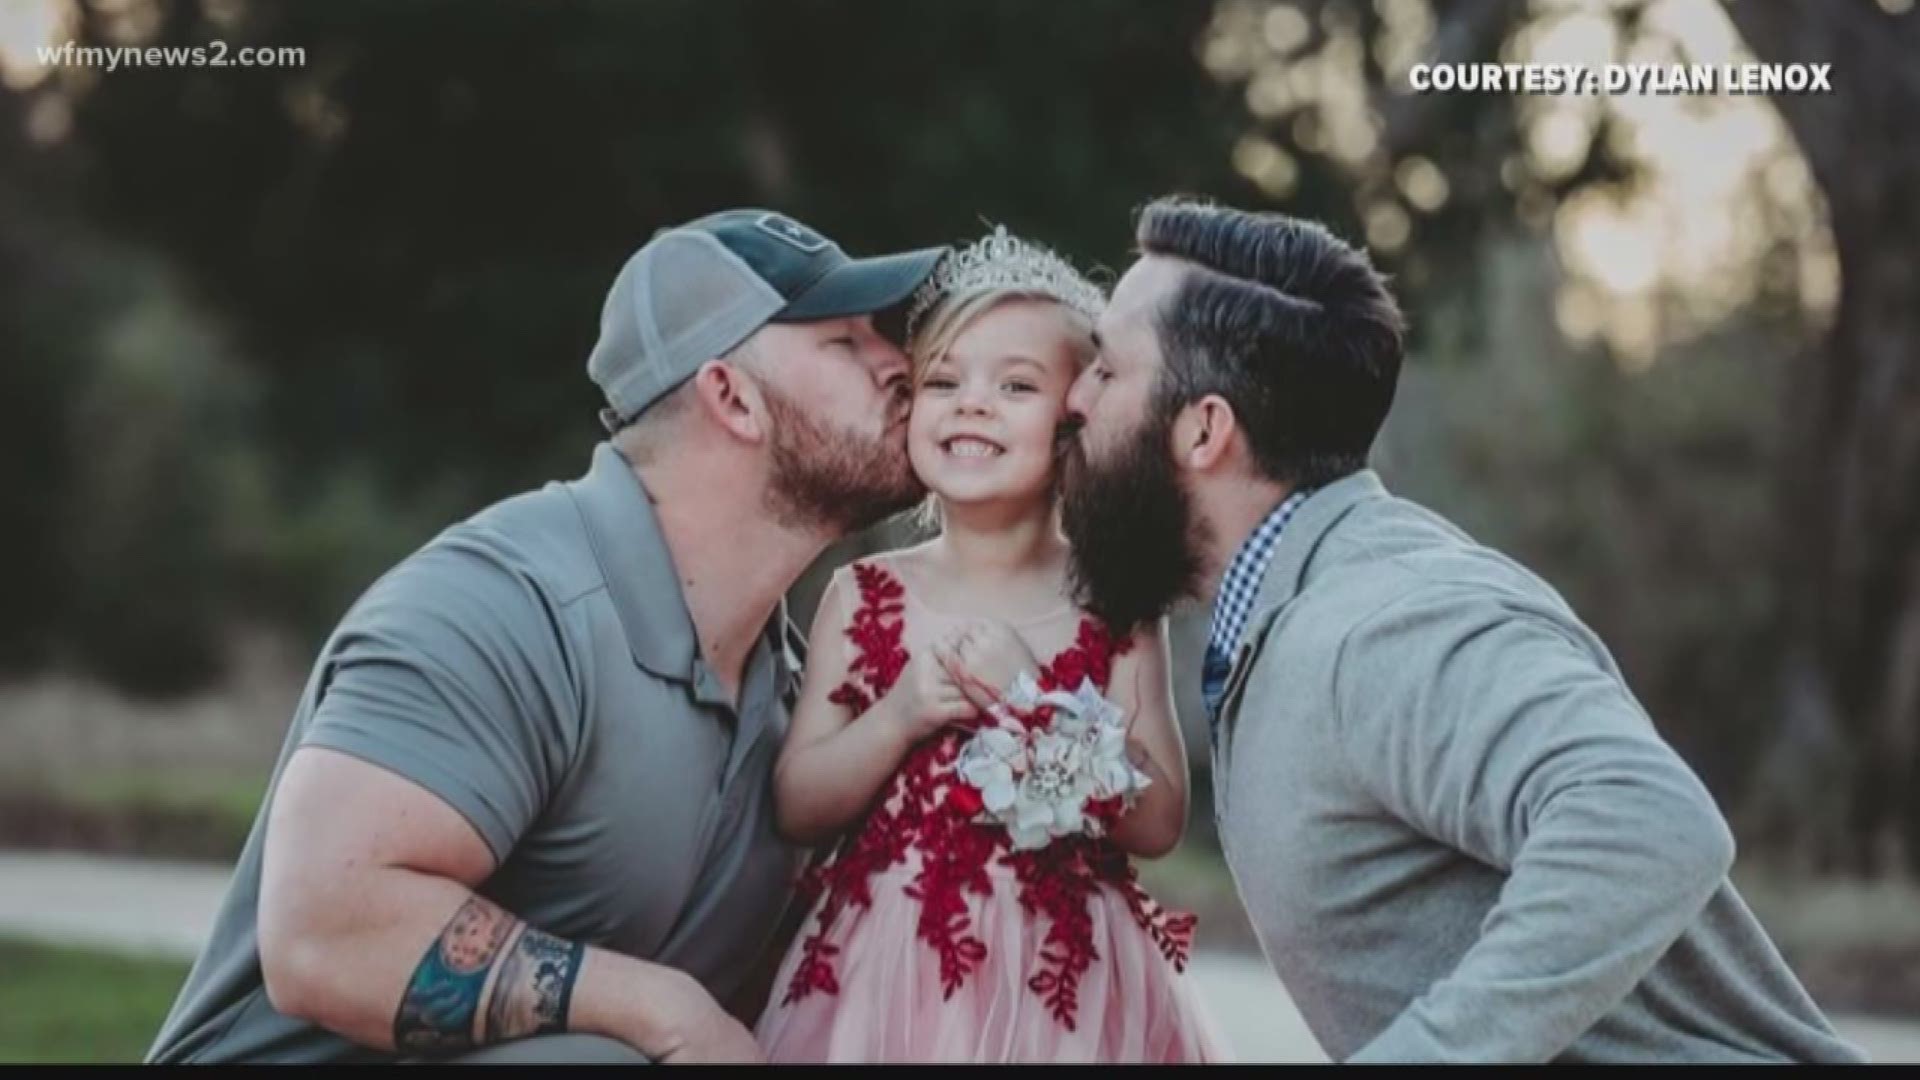 It's a story touching hearts across the country, about a dad, his daughter and her soon-to-be step dad in Texas.